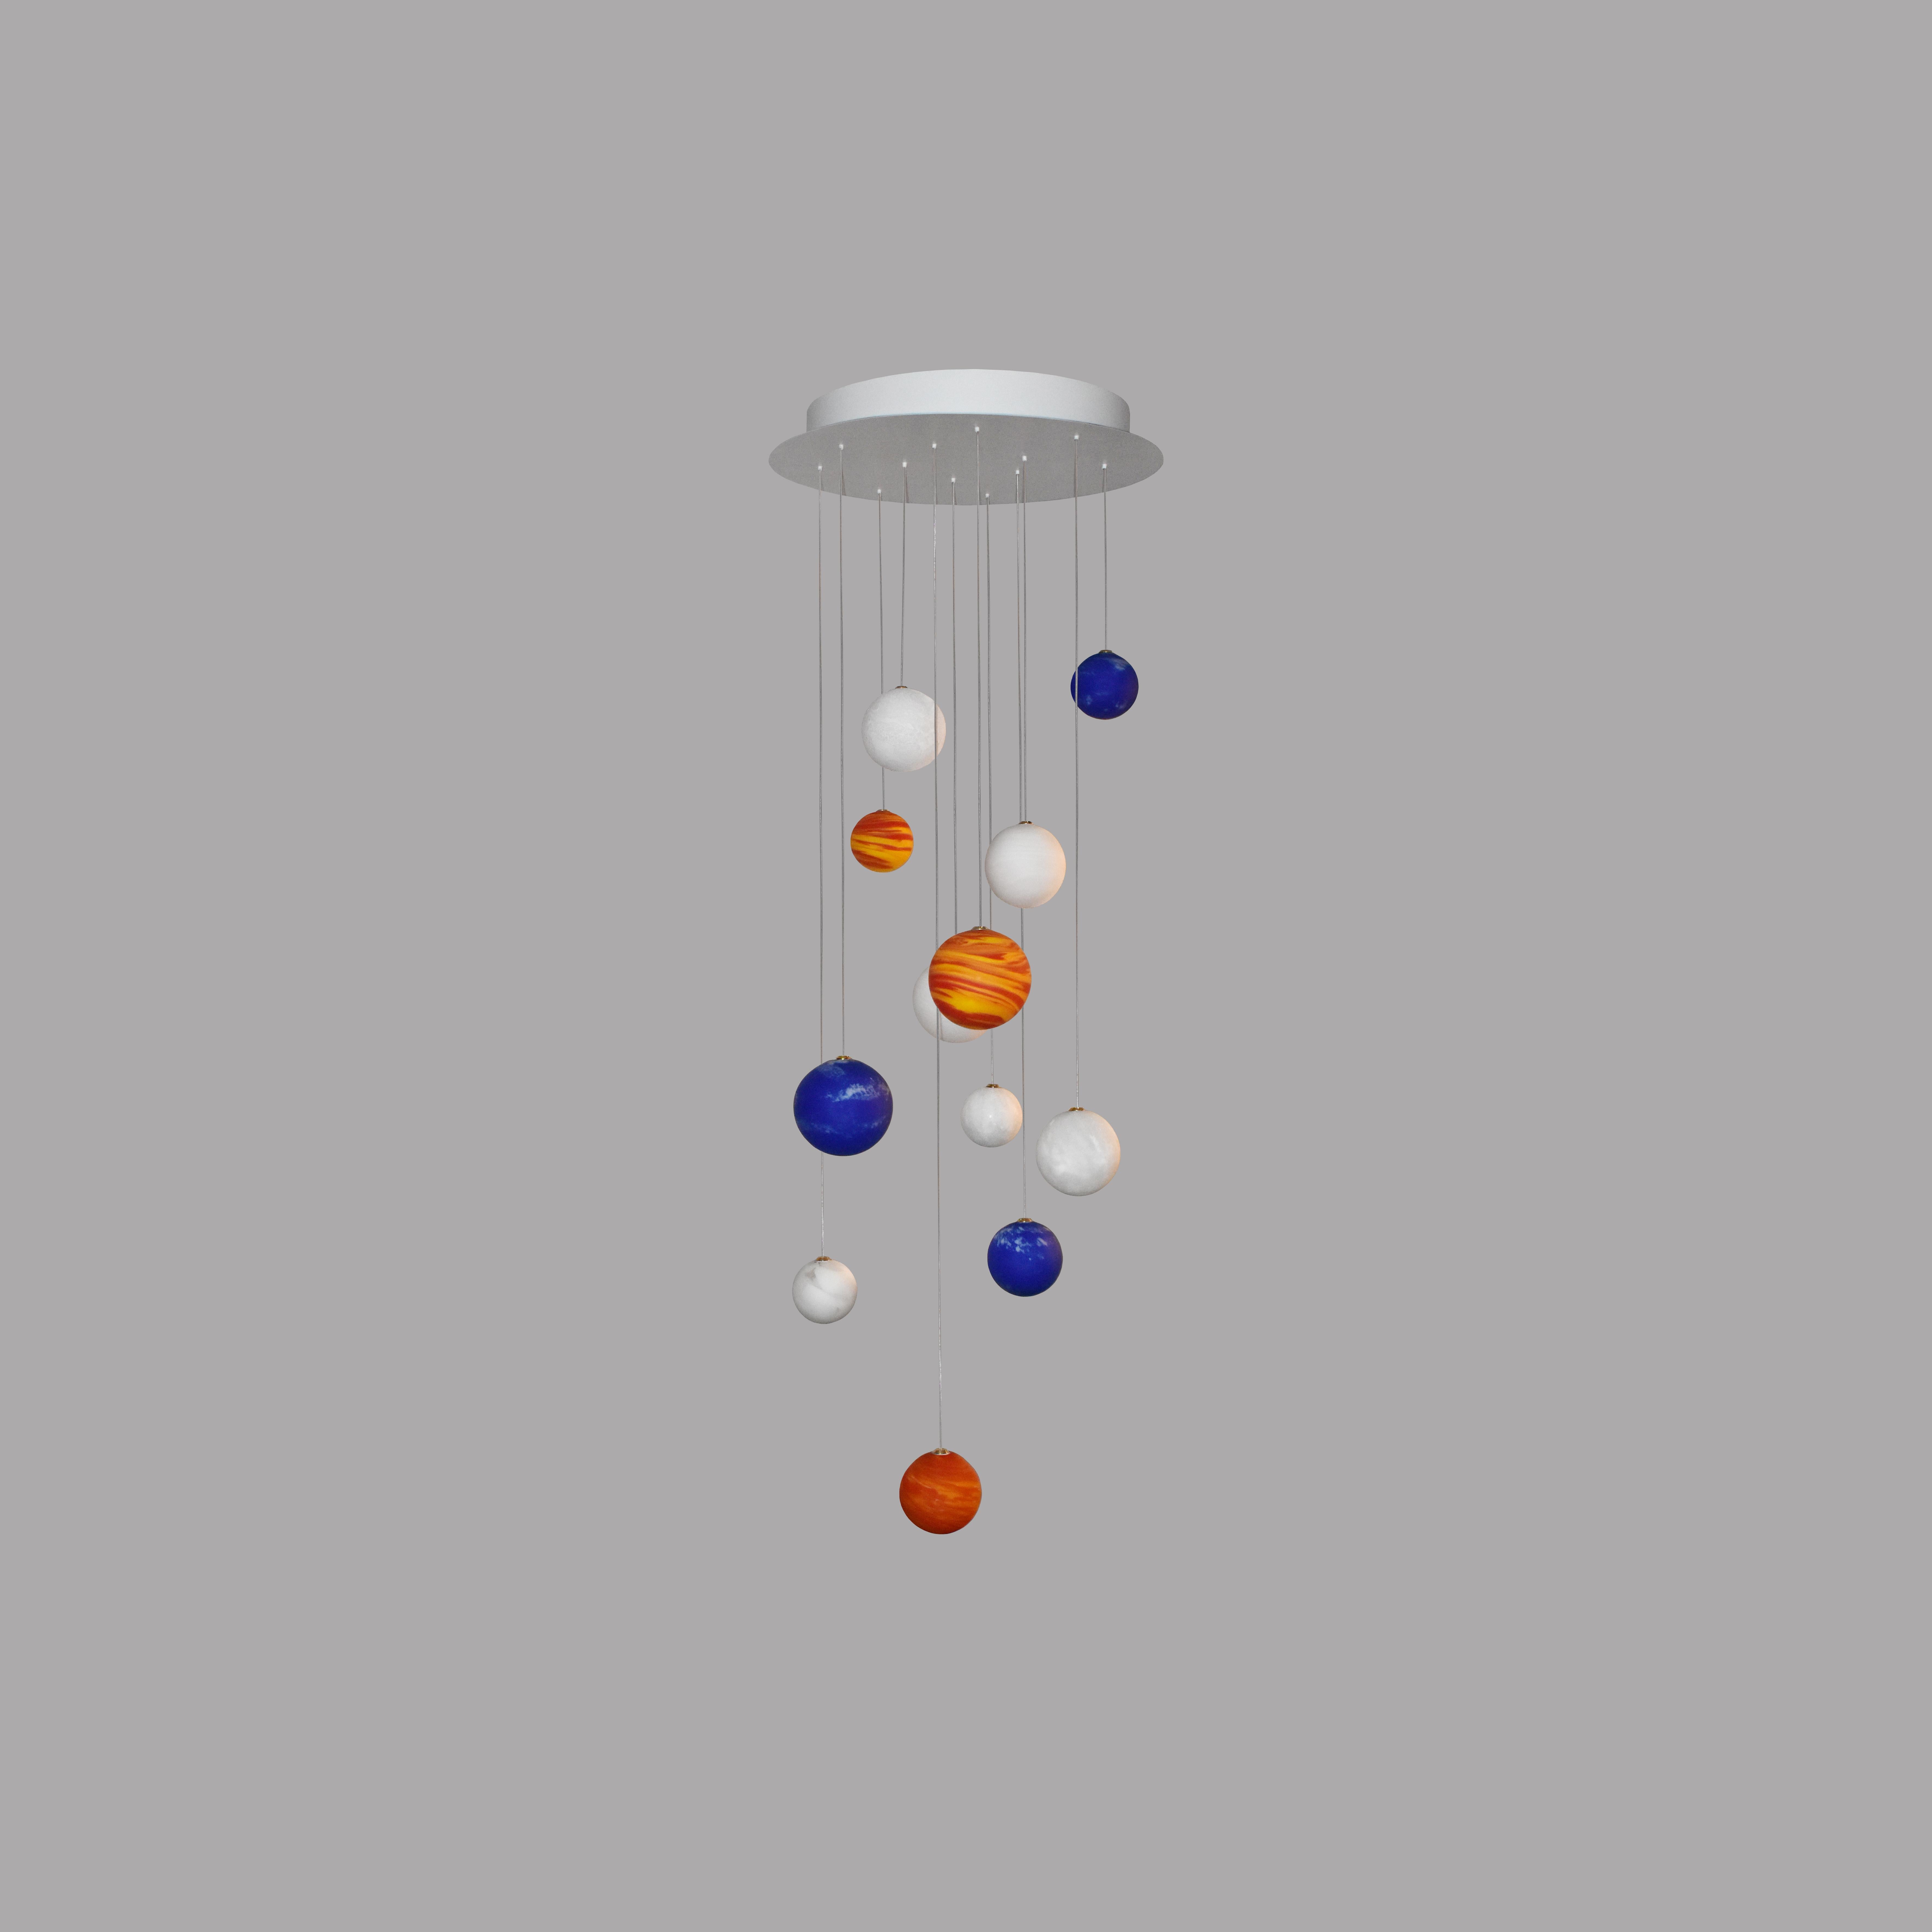 12 Planets, Ciels And Couchers De Soleil Chandelier by Ludovic Clément D’armont
Dimensions: Ø 60 x H 200 cm.
Materials: Blown glass and painted steel.

Every creation of Ludovic Clément d’Armont can be made to order in any requested dimensions. 12